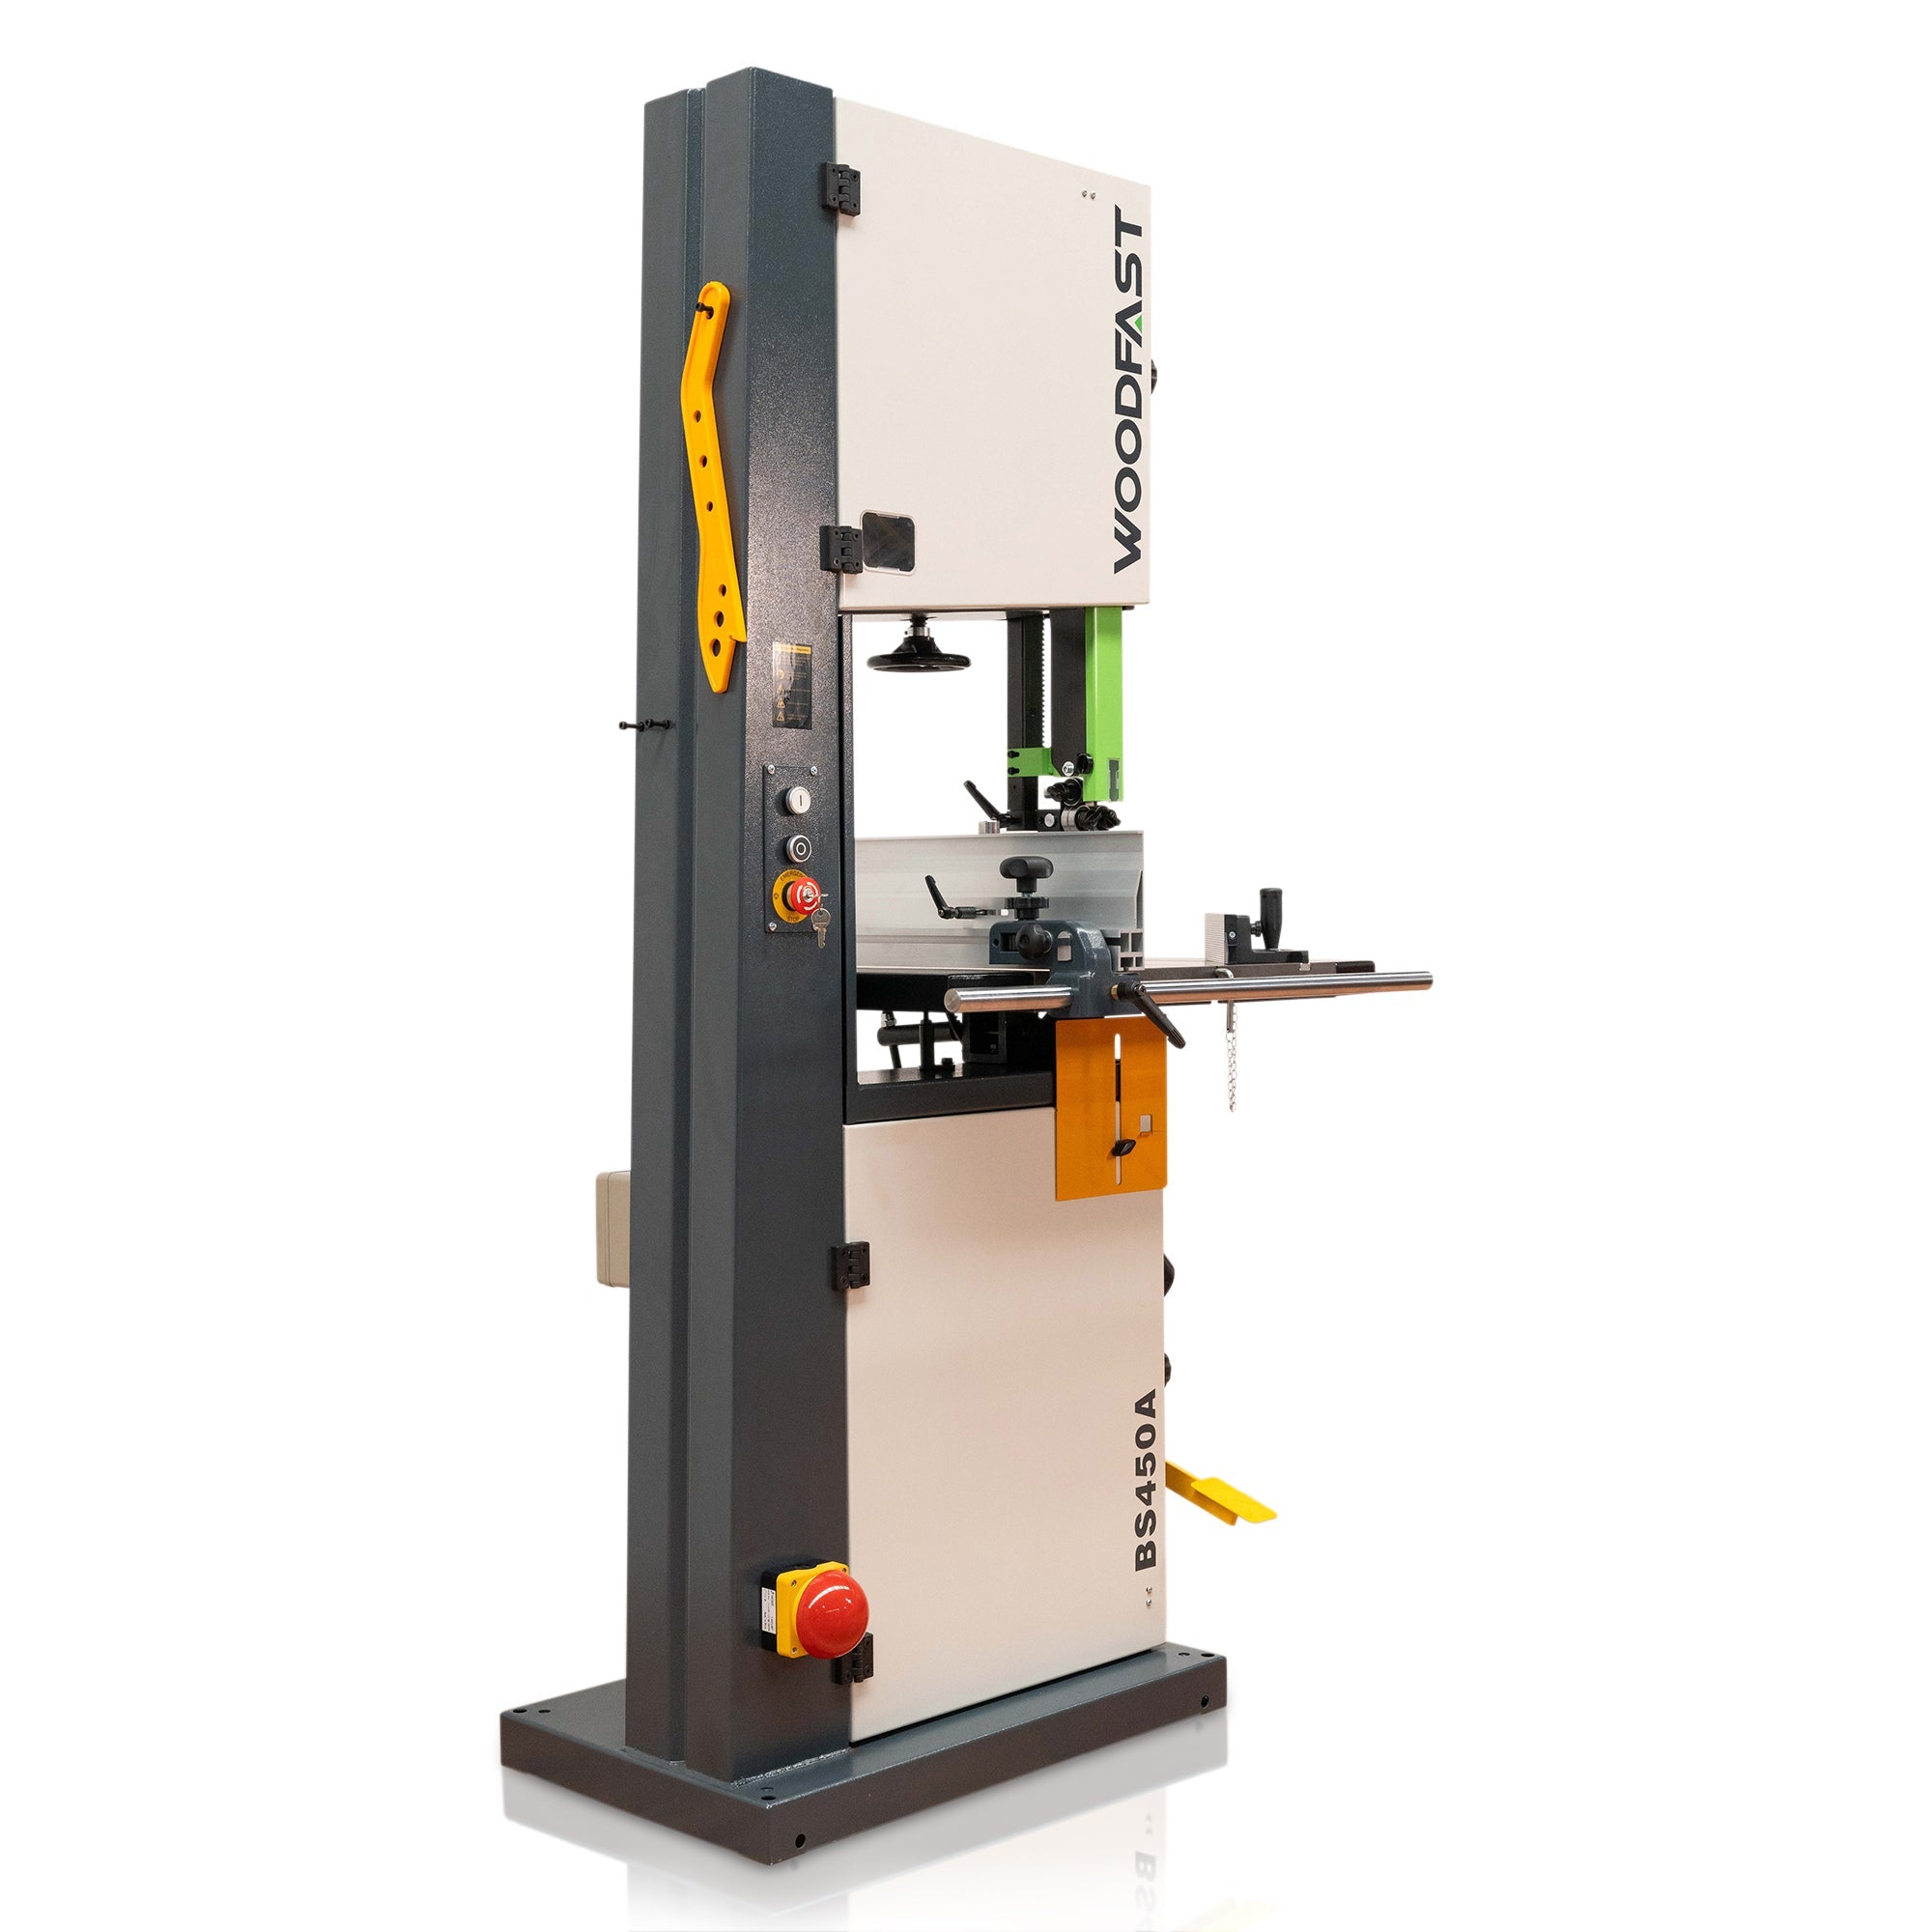 450mm (18") 3HP Deluxe Wood Bandsaw BS450A by Woodfast